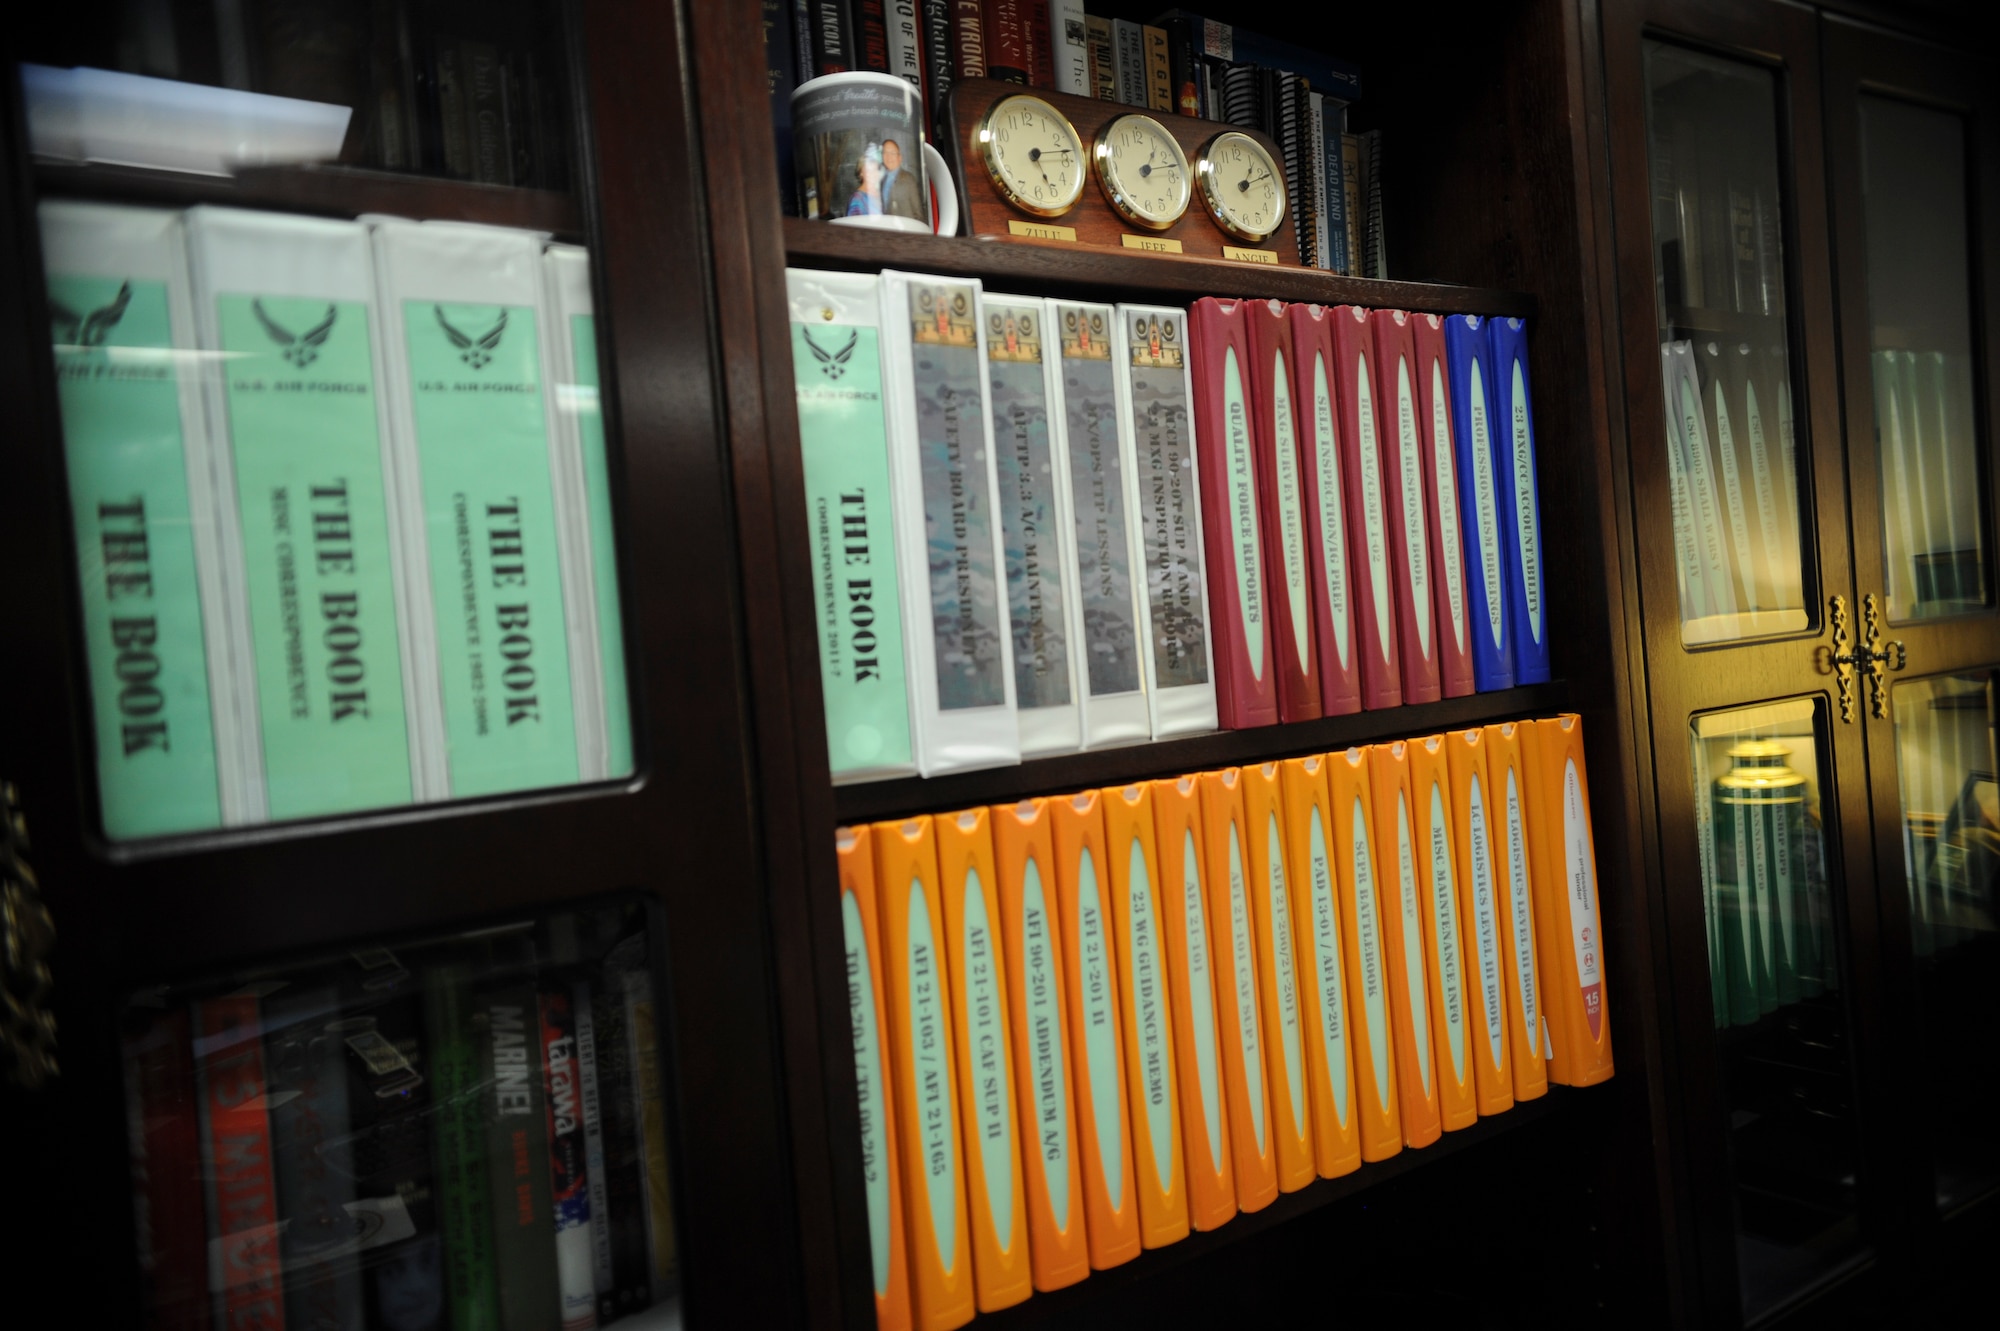 Color-coded maintenance regulations, Air Force Instructions, and history books sit perfectly aligned on the office credenza of U.S. Air Force Col. Jeffrey Decker, 23d Maintenance Group commander, Sept. 25, 2014 at Moody Air Force Base, Ga.  The clock, a gift from his wife Angie, is set for local time, zulu time and the time zones for when his wife is traveling on business. (U.S. Air Force photo by Andrea Jenkins)